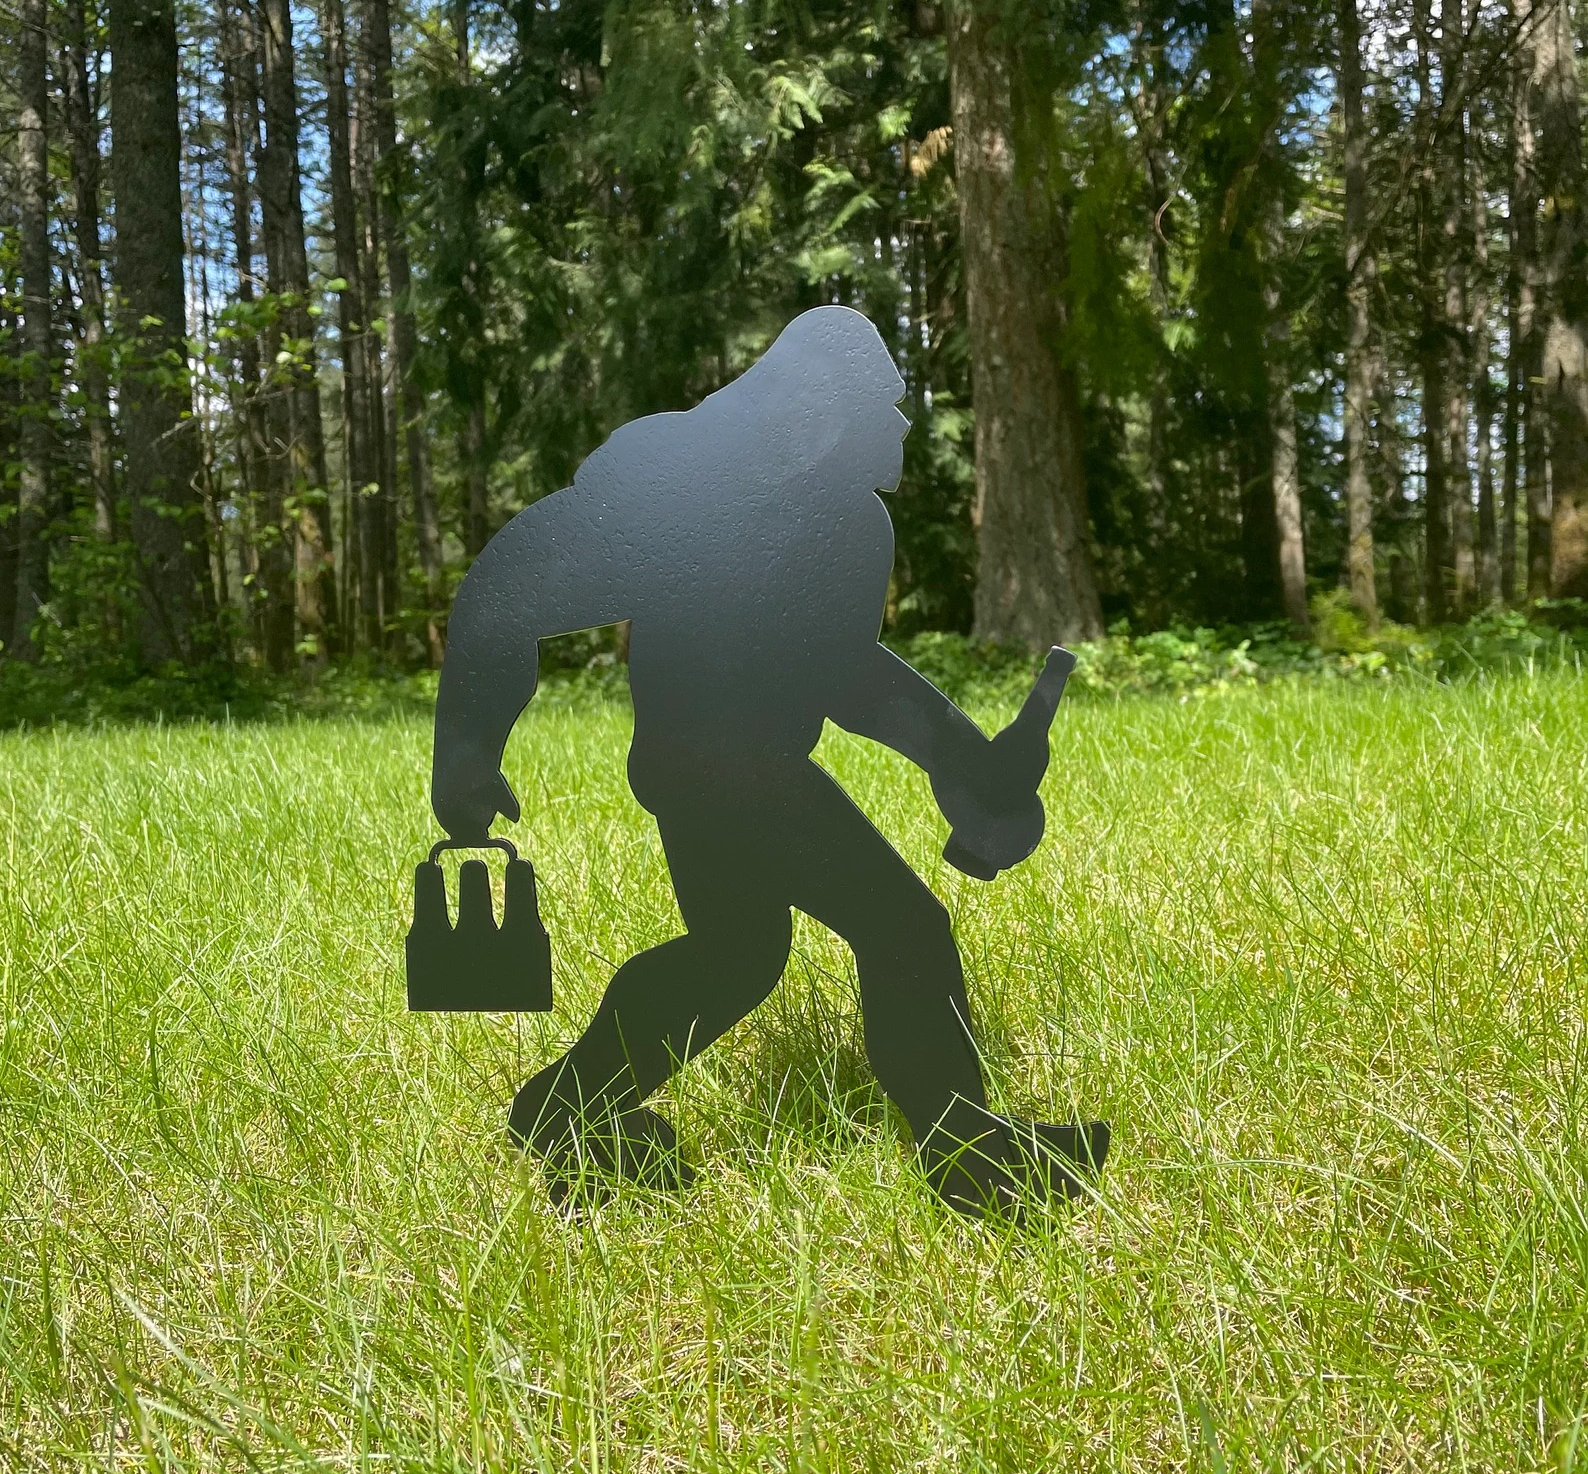 Black metal outlined big foot stake placed in grass outside in front of trees